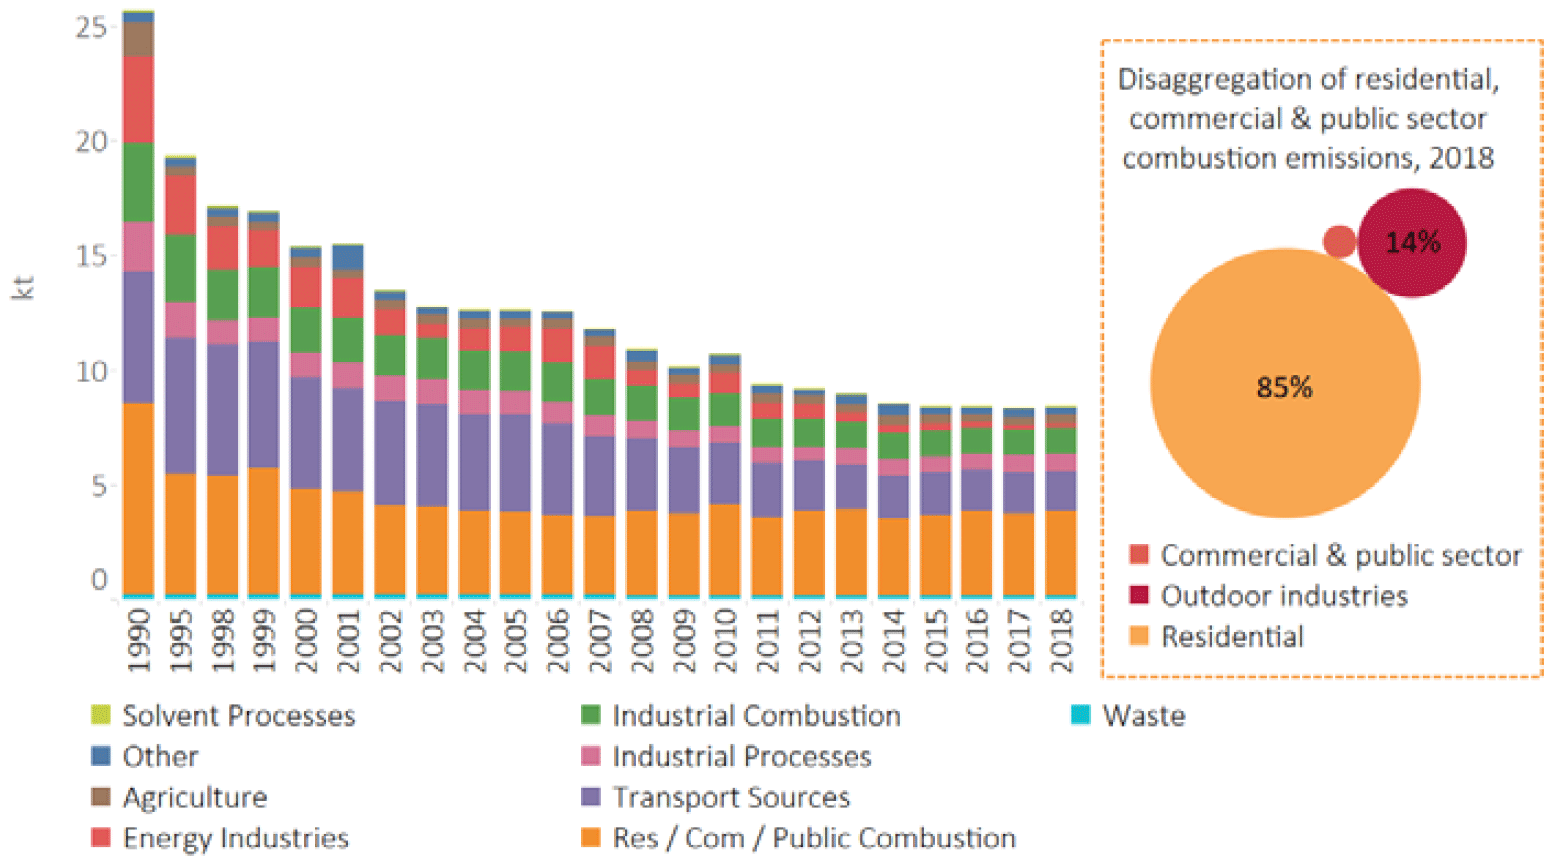 PM2.5 emissions have declined by 67% since 1990. The primary drivers for the decline in emissions since 1990 are the switch in the fuel mix used in electricity generation away from coal and towards natural gas, particularly in the early time series, and later reductions in emissions from the transport sector.  Since 2005, declines in emissions have been offset by increases in emissions from the residential sector, and in particular, the combustion of wood.